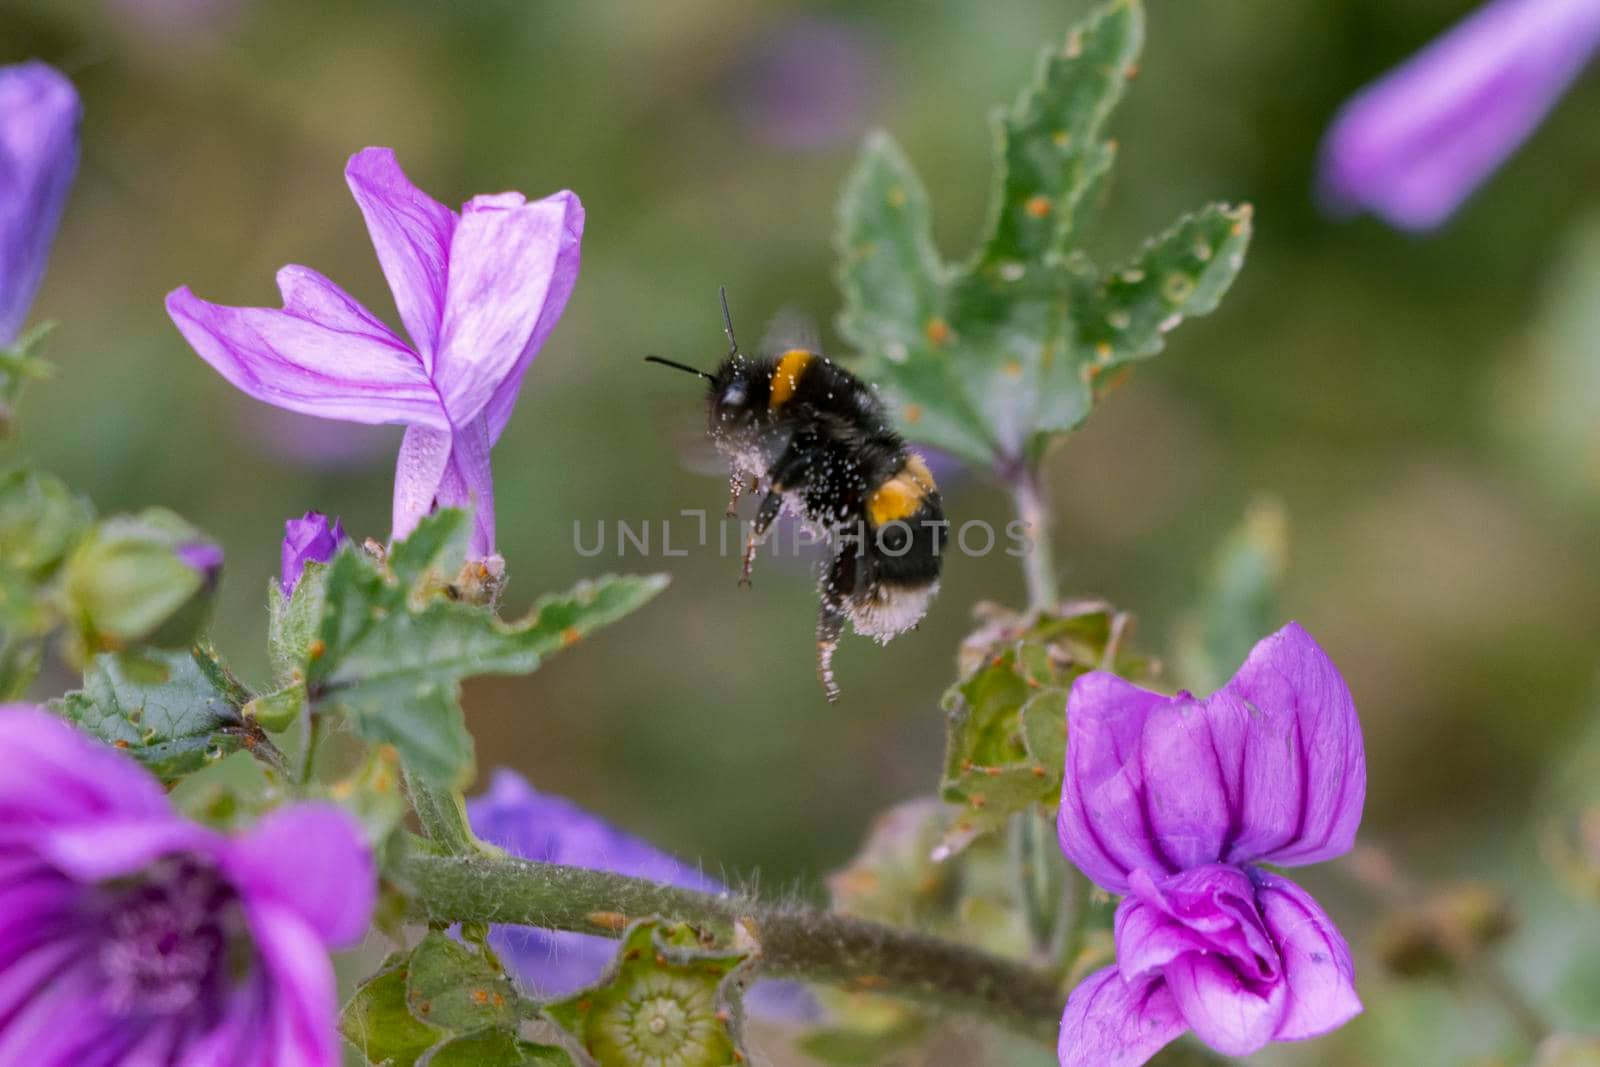 Bombus locurum, white-tailed fluffy yellow and black bee in flight with pollen particles on its head and body. Flying around a bunch of pretty pink wildflowers and green leaves in UK. Canon EOS 90D